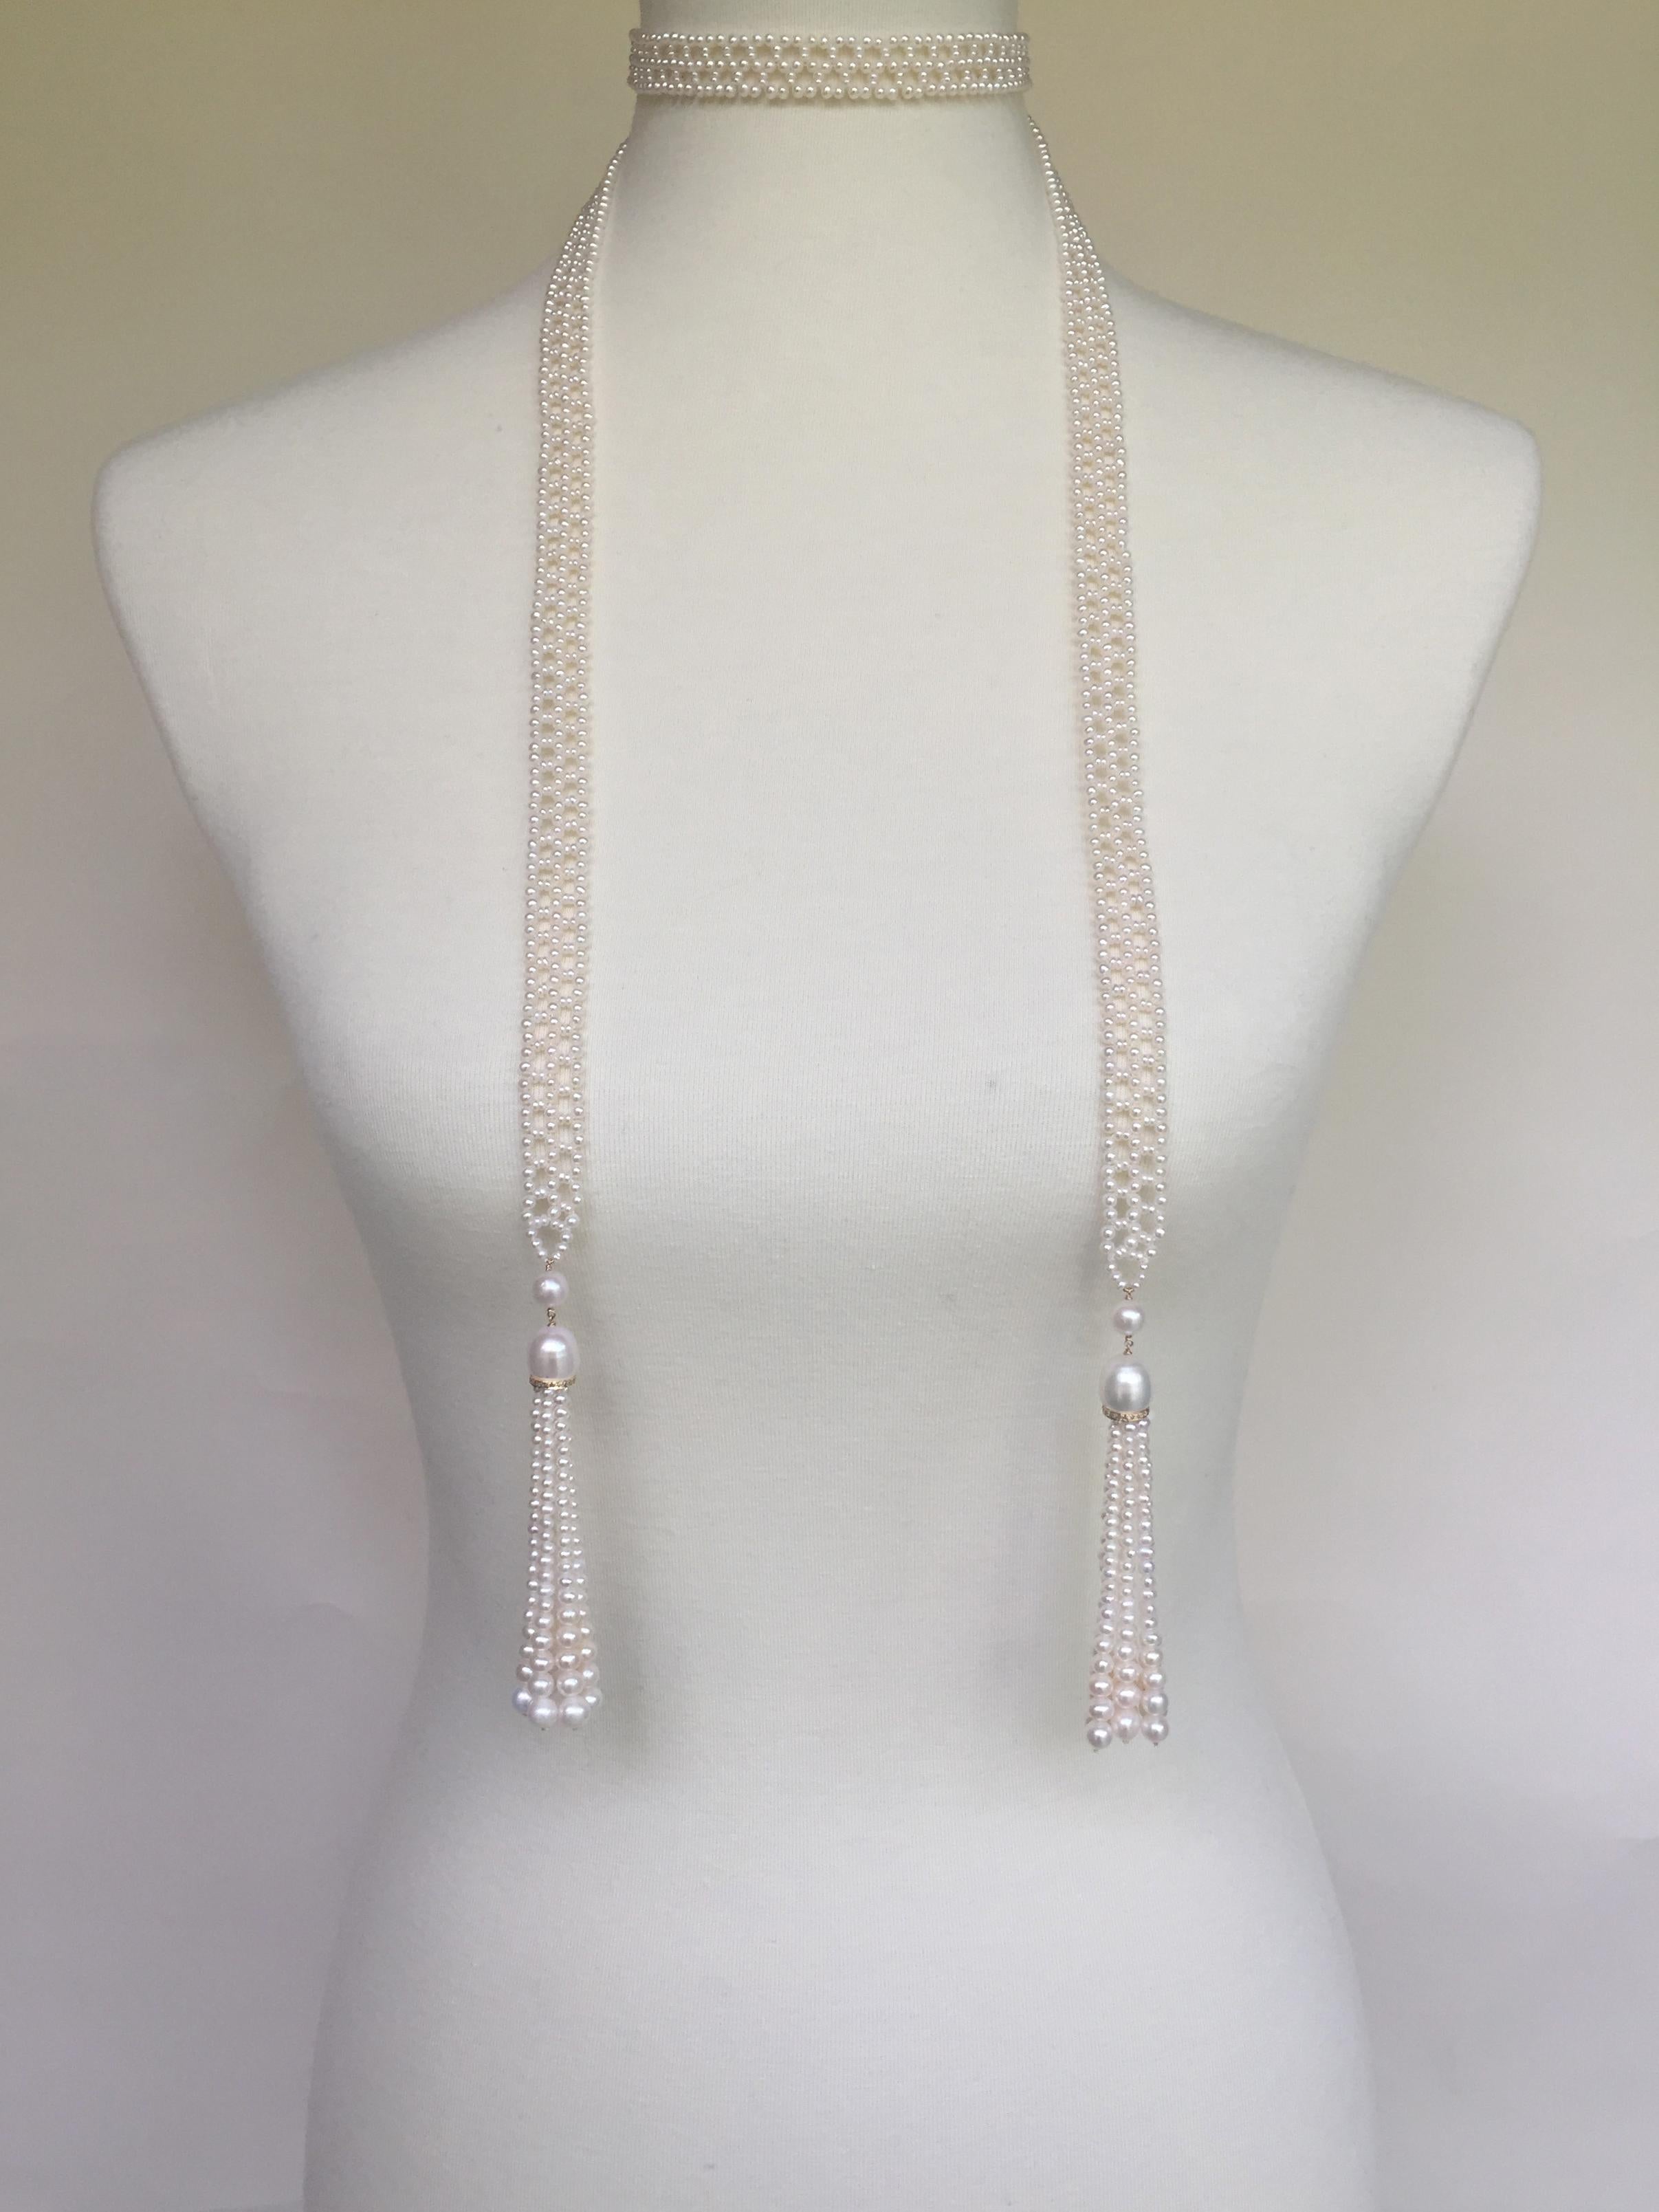 Marina J Woven Pearl Sautoir Necklace with Diamonds and 14 K God Tassels im Zustand „Neu“ in Los Angeles, CA